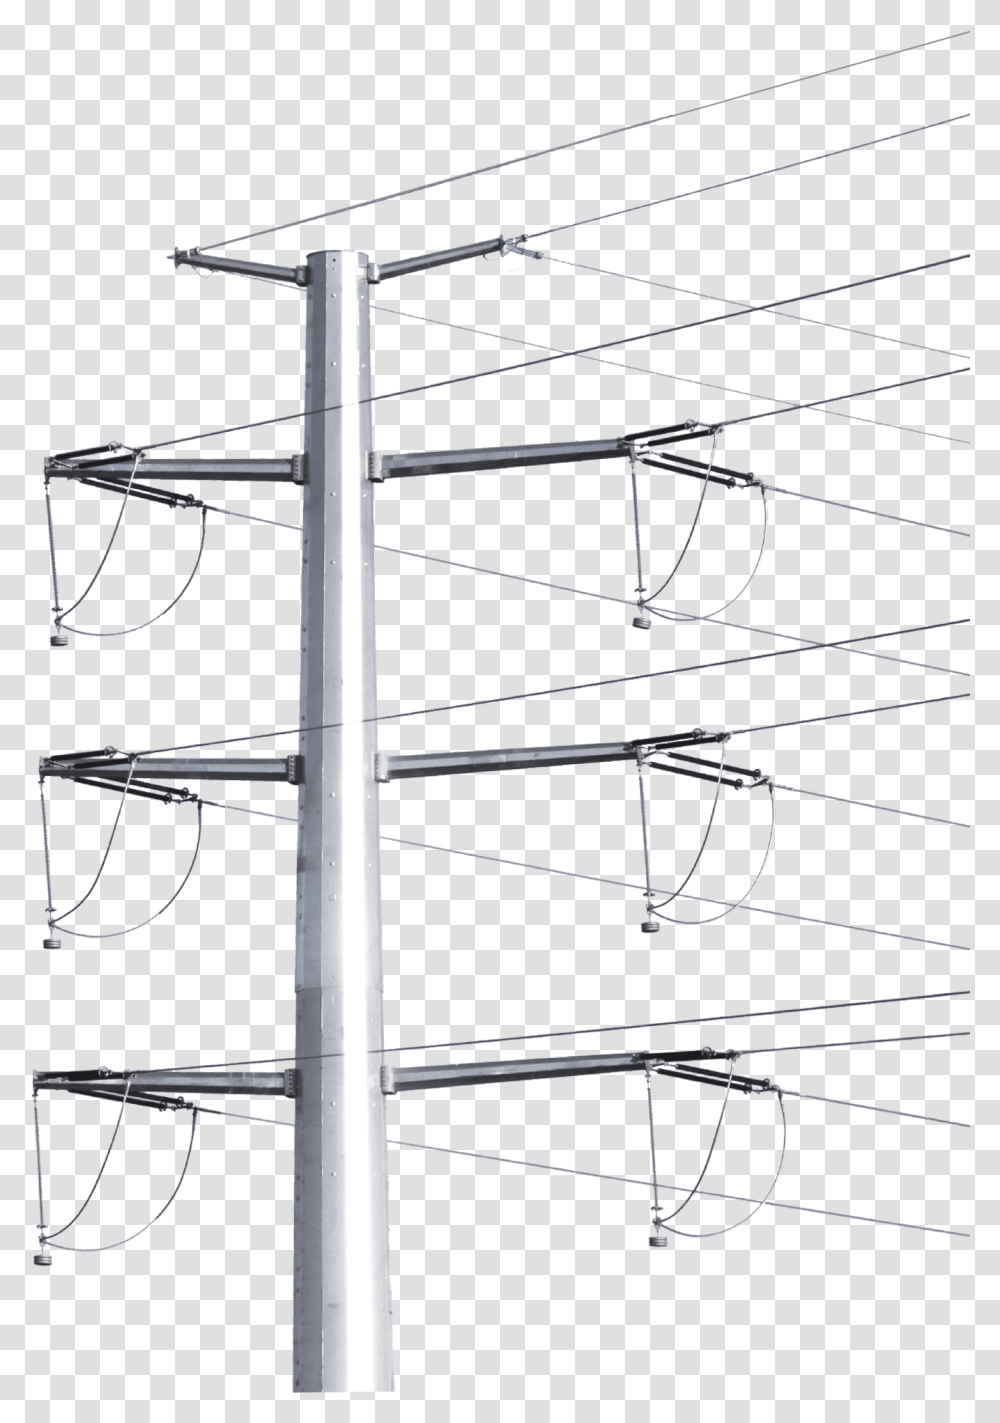 Image Overhead Power Line, Utility Pole, Cable, Power Lines, Electric Transmission Tower Transparent Png